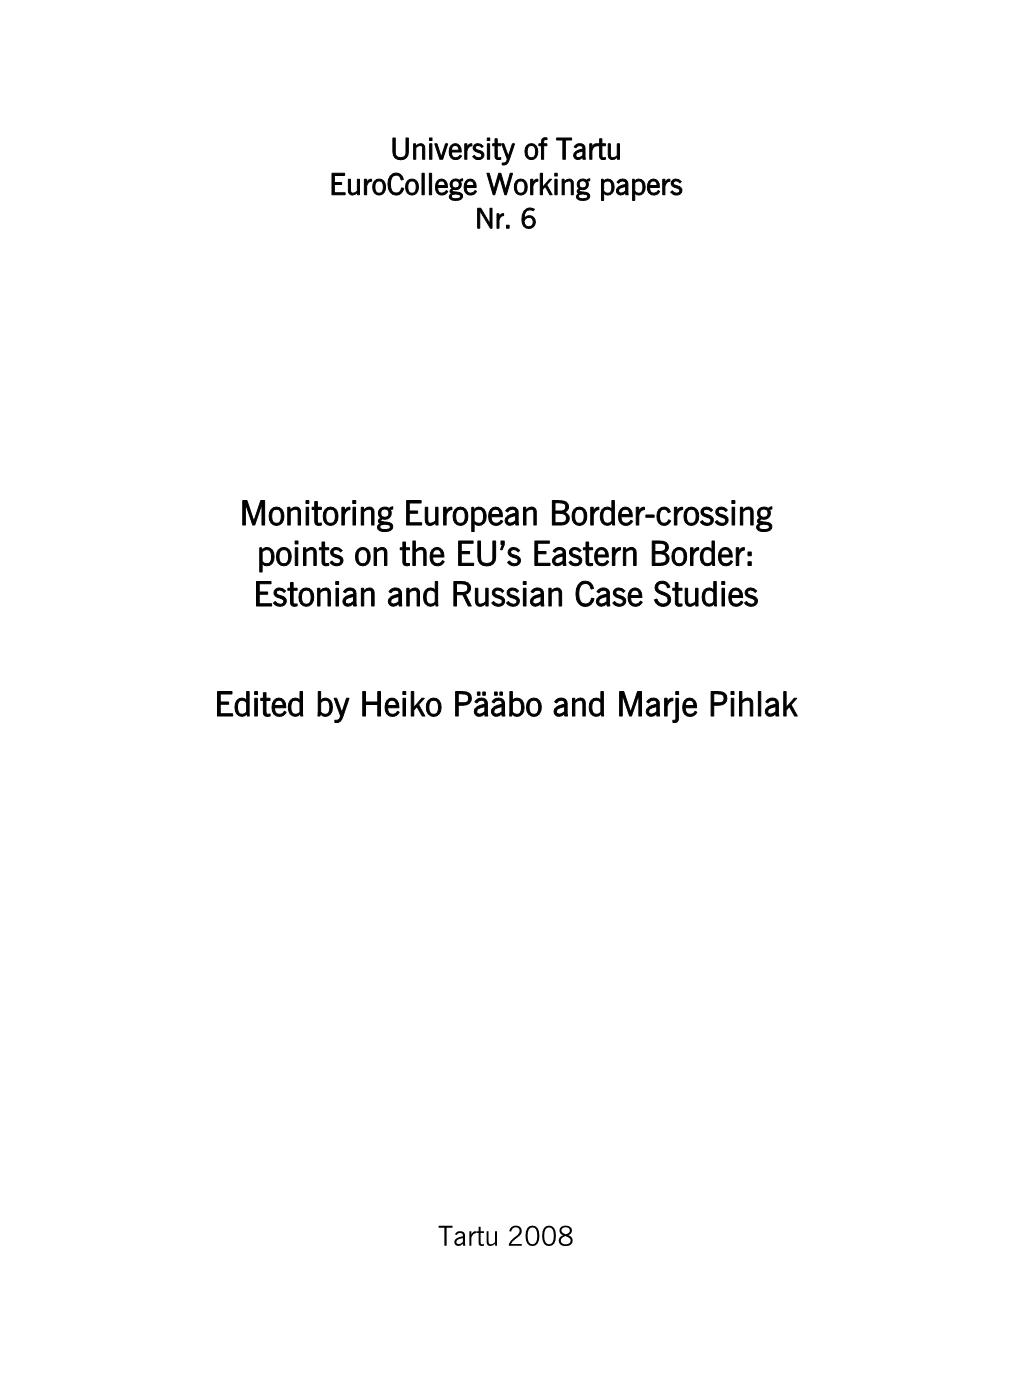 Monitoring European Border-Crossing Points on the EU's Eastern